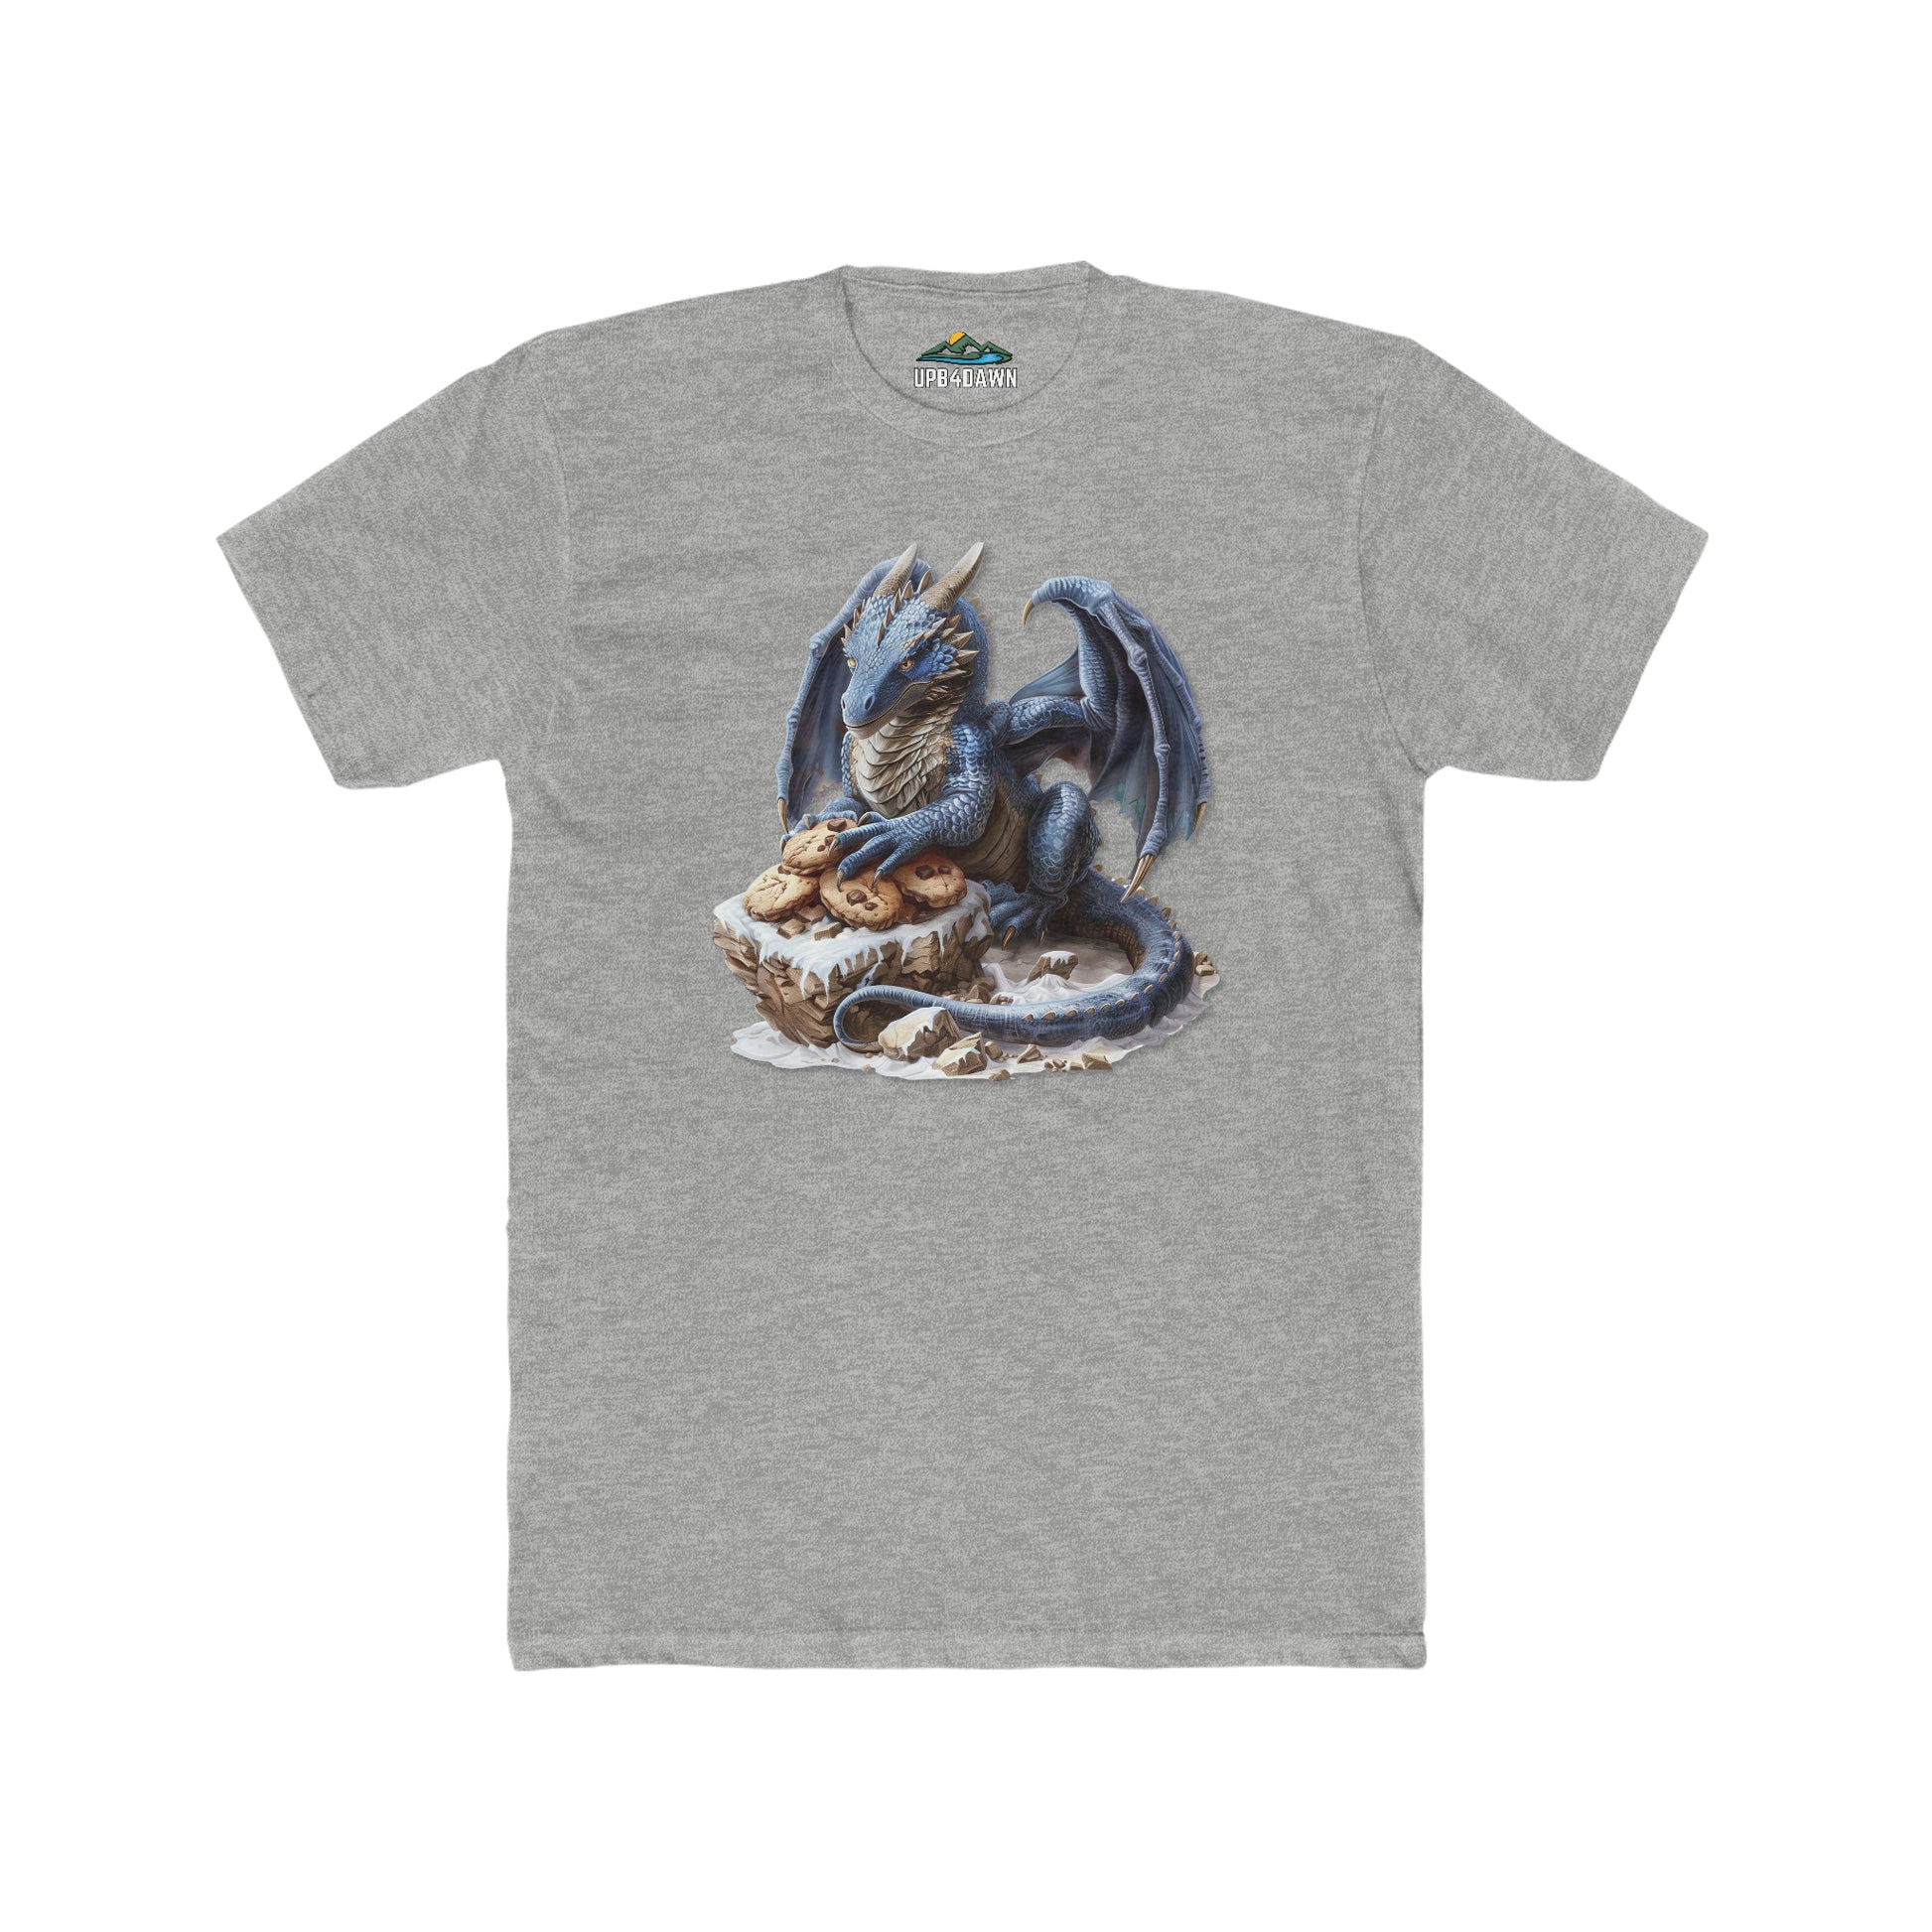 A black Men's Cotton Crew Tee - Blue Dragon 3 with a detailed high-quality print featuring a blue dragon perched atop rocks, displayed flat on a white background.